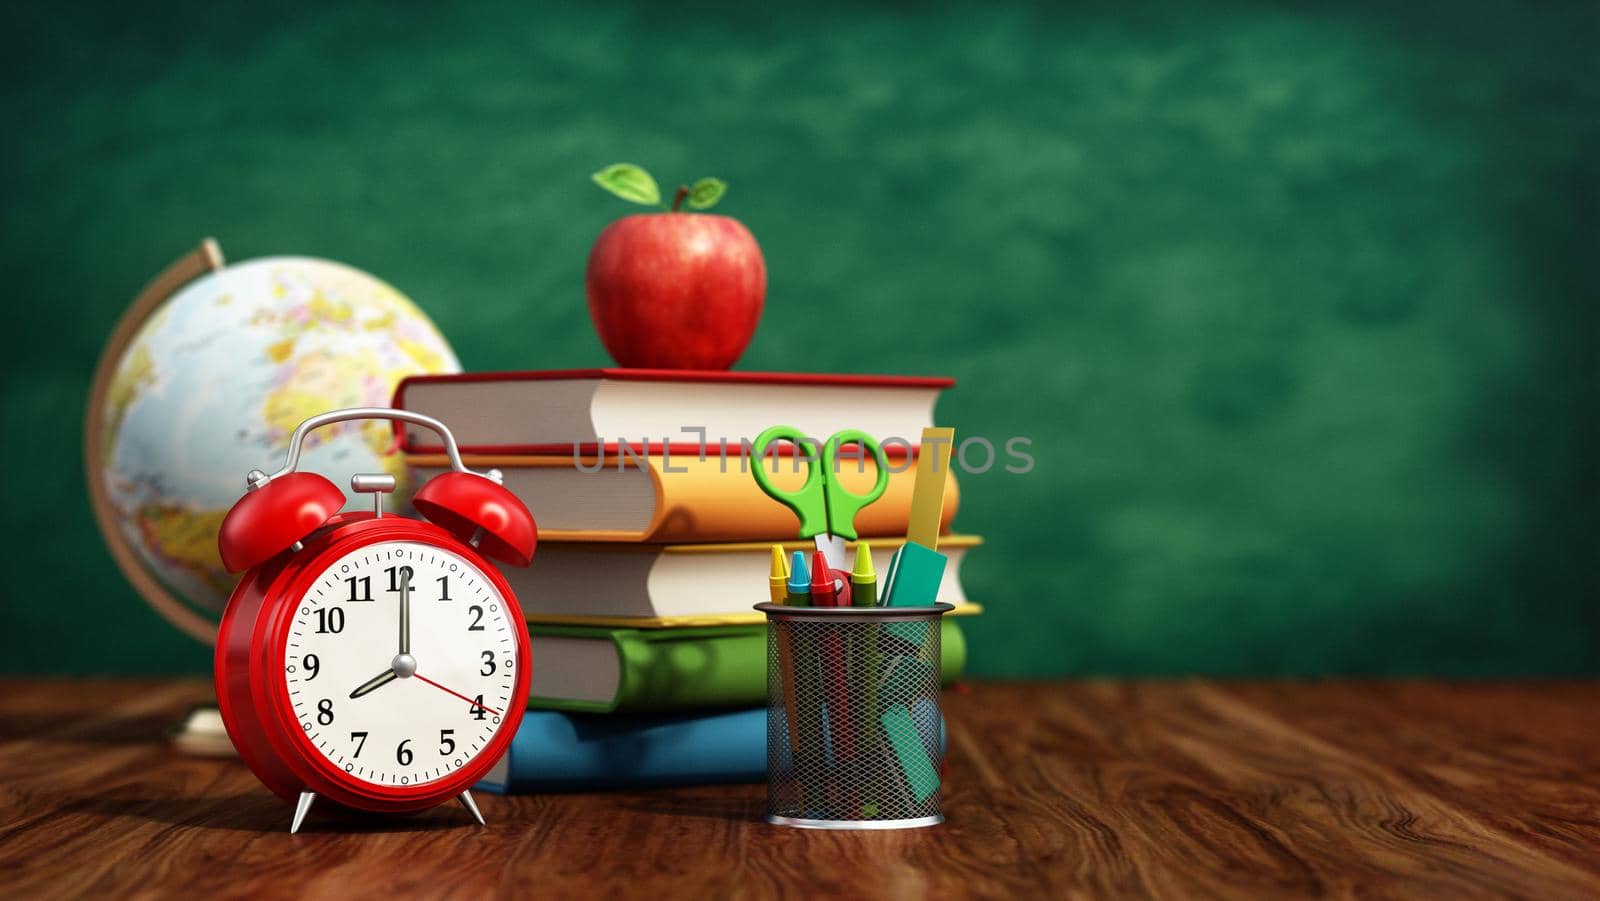 Red apple, books, pencil holder, model globe and alarm clock on green board. 3D illustration by Simsek